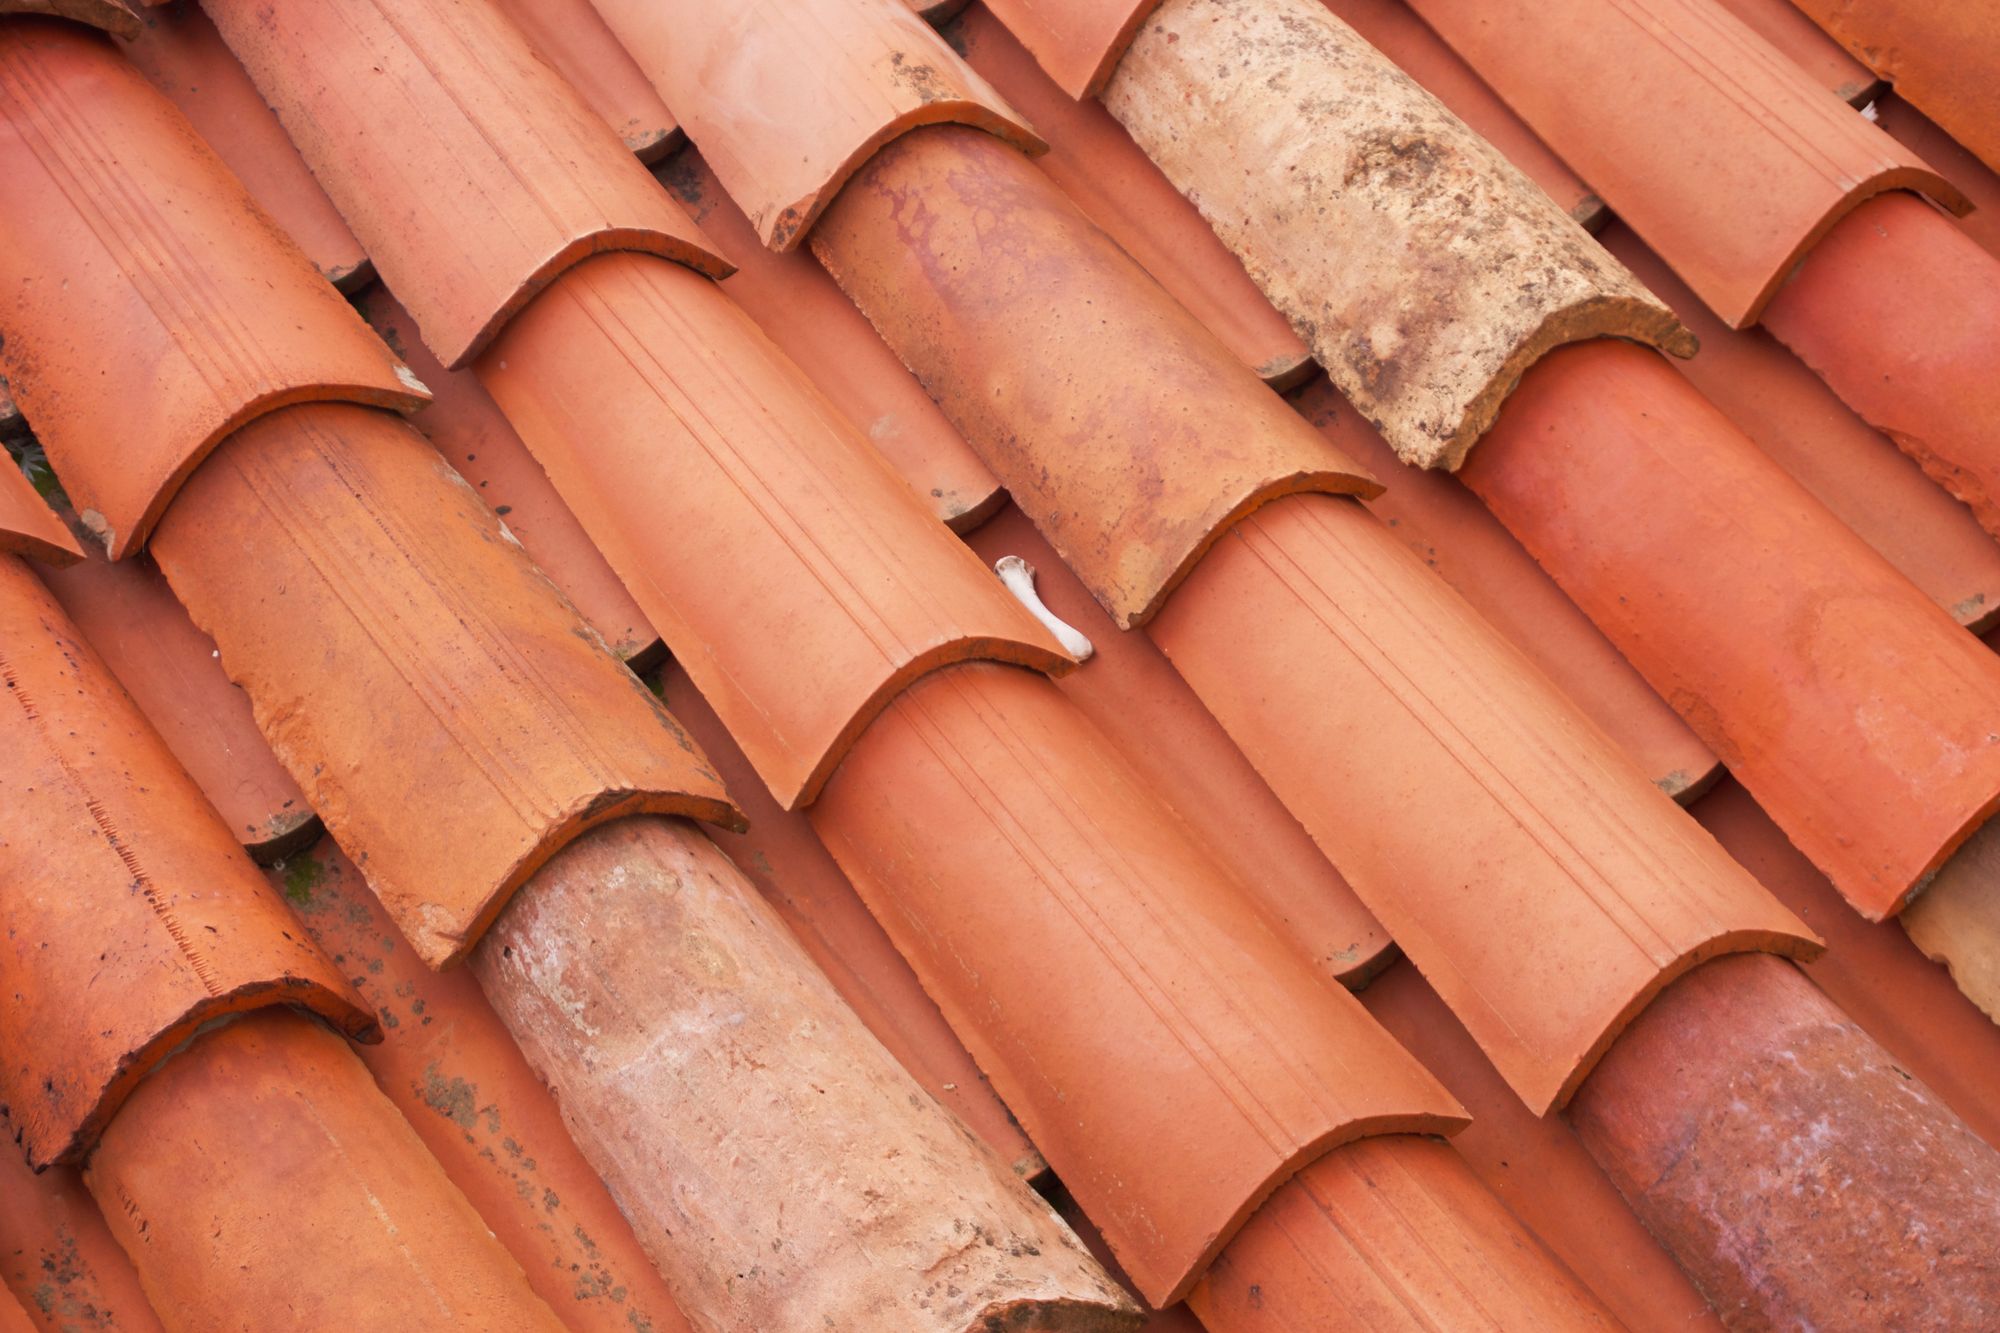 Curved terracotta tiling on a roof with varying states of aging—some looking brand new and some with complex multi-coloured patinas. Nestled between two rows is a chicken bone.